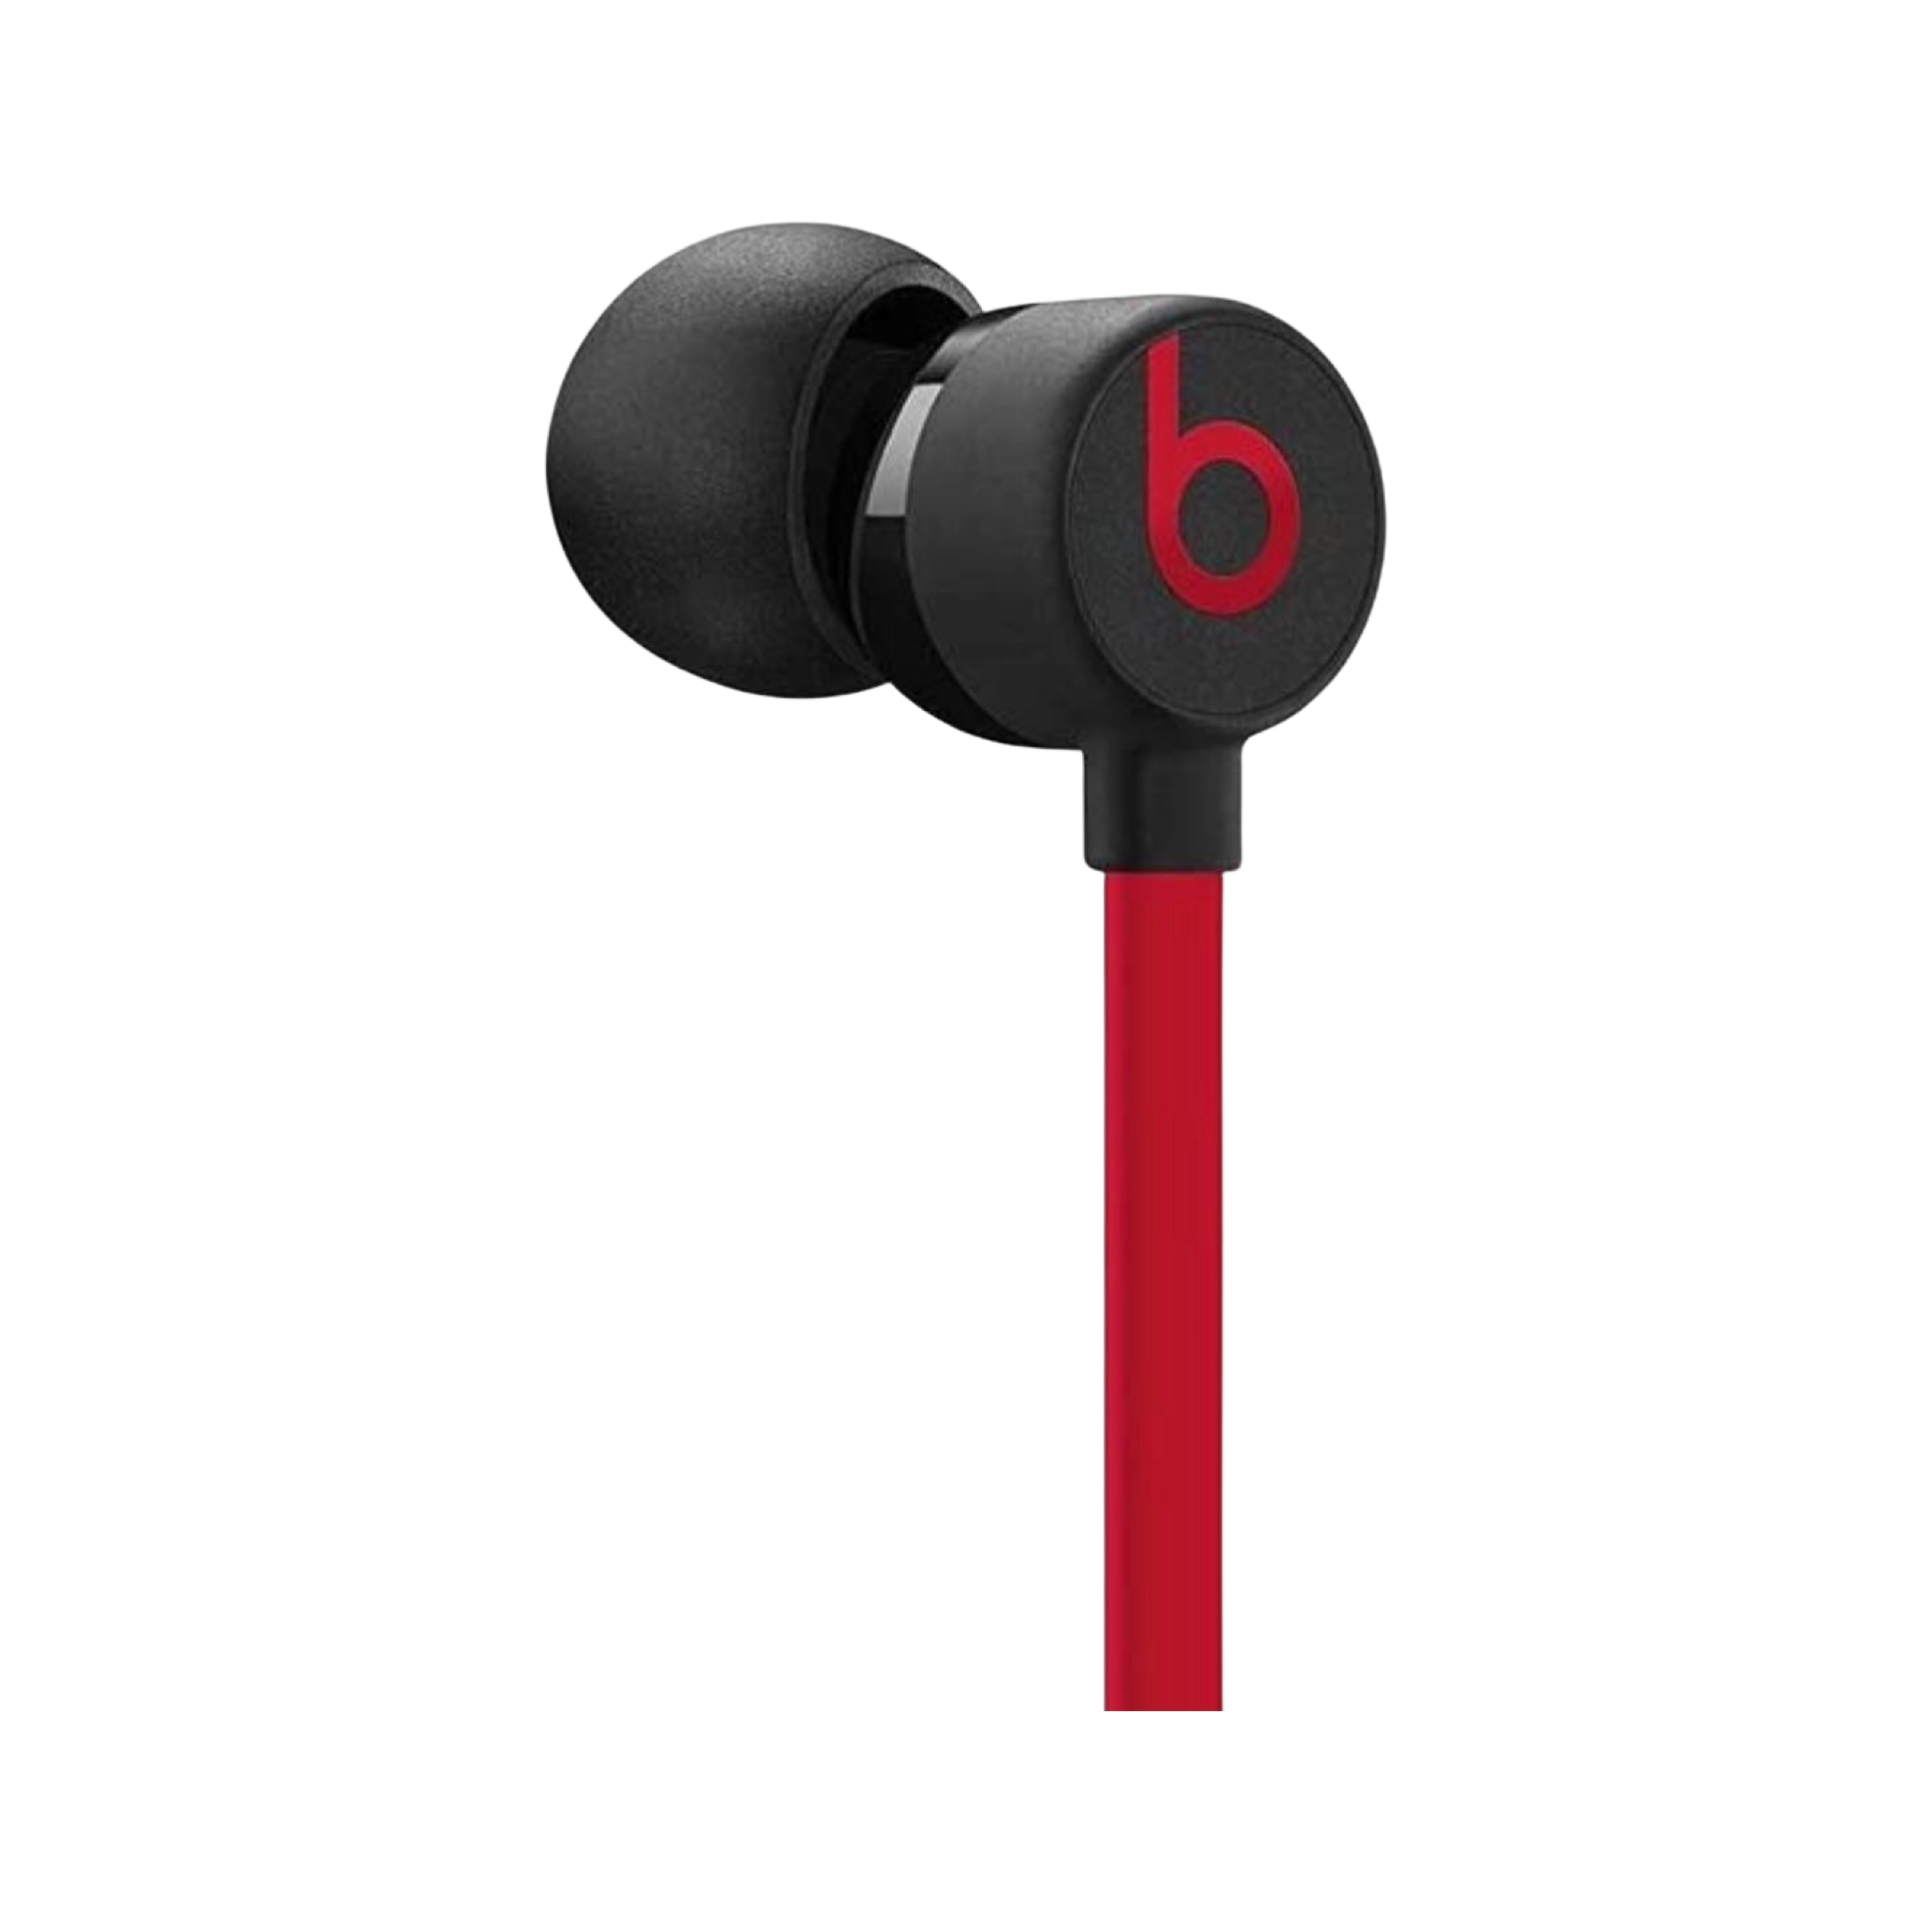 Beats by Dr. Dre urBeats³ Earphones with 3.5mm Plug - Defiant Black-Red